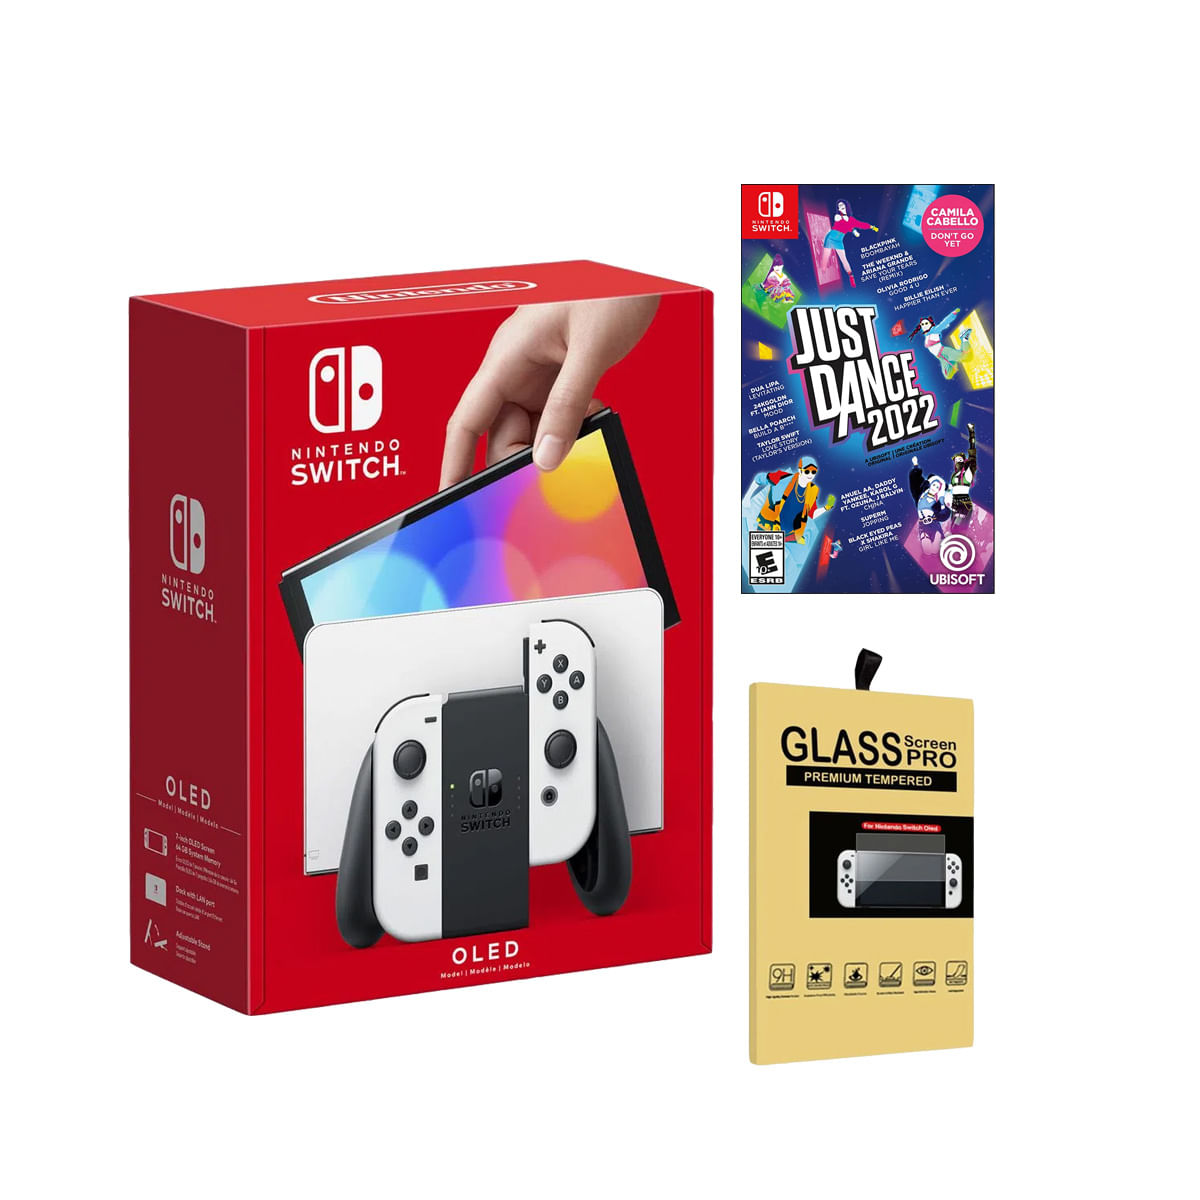 Consola Nintendo Switch Oled Blanca + Just Dance 2022 + Mica